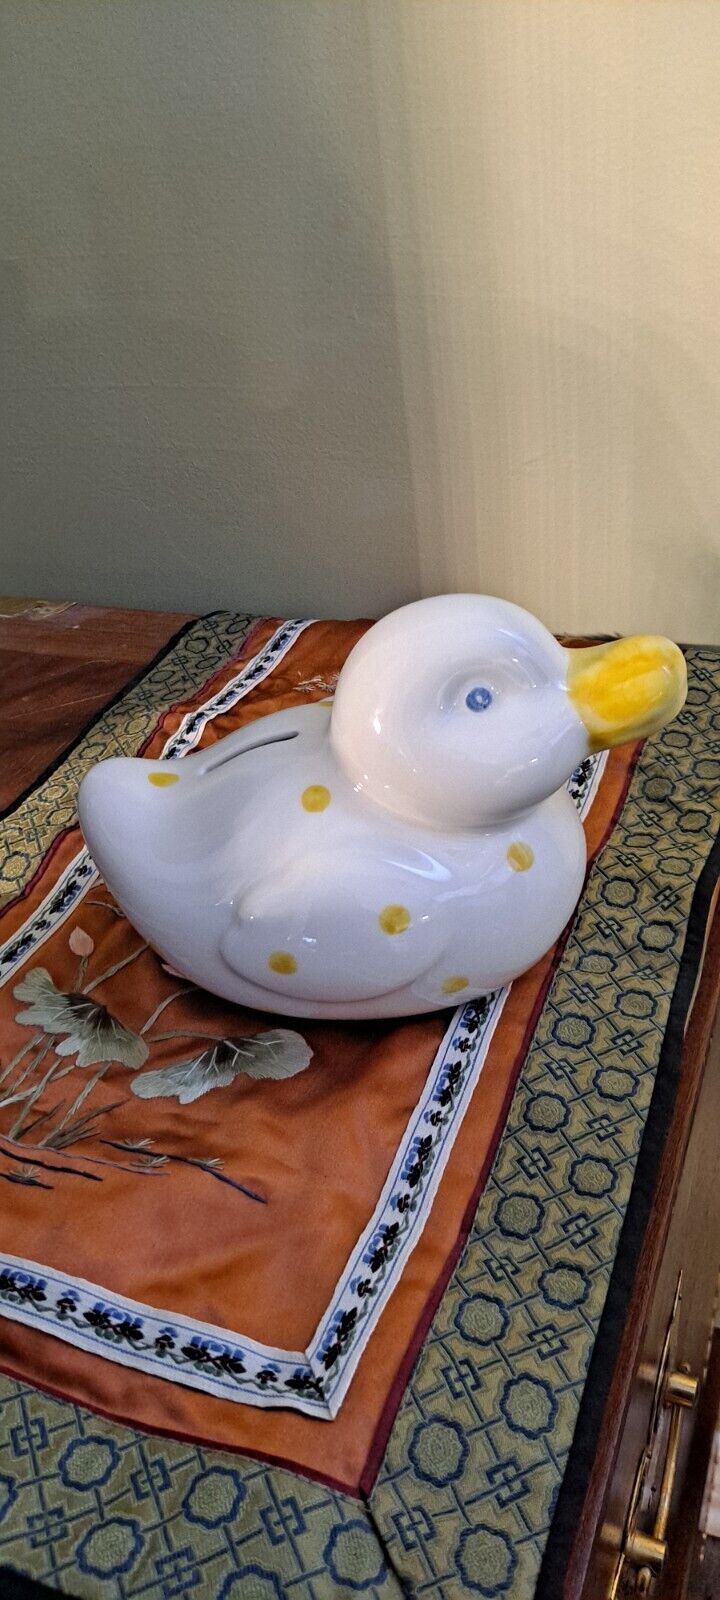 TIFFANY  & CO CERAMIC DUCK COIN BANK MADE IN ITALY